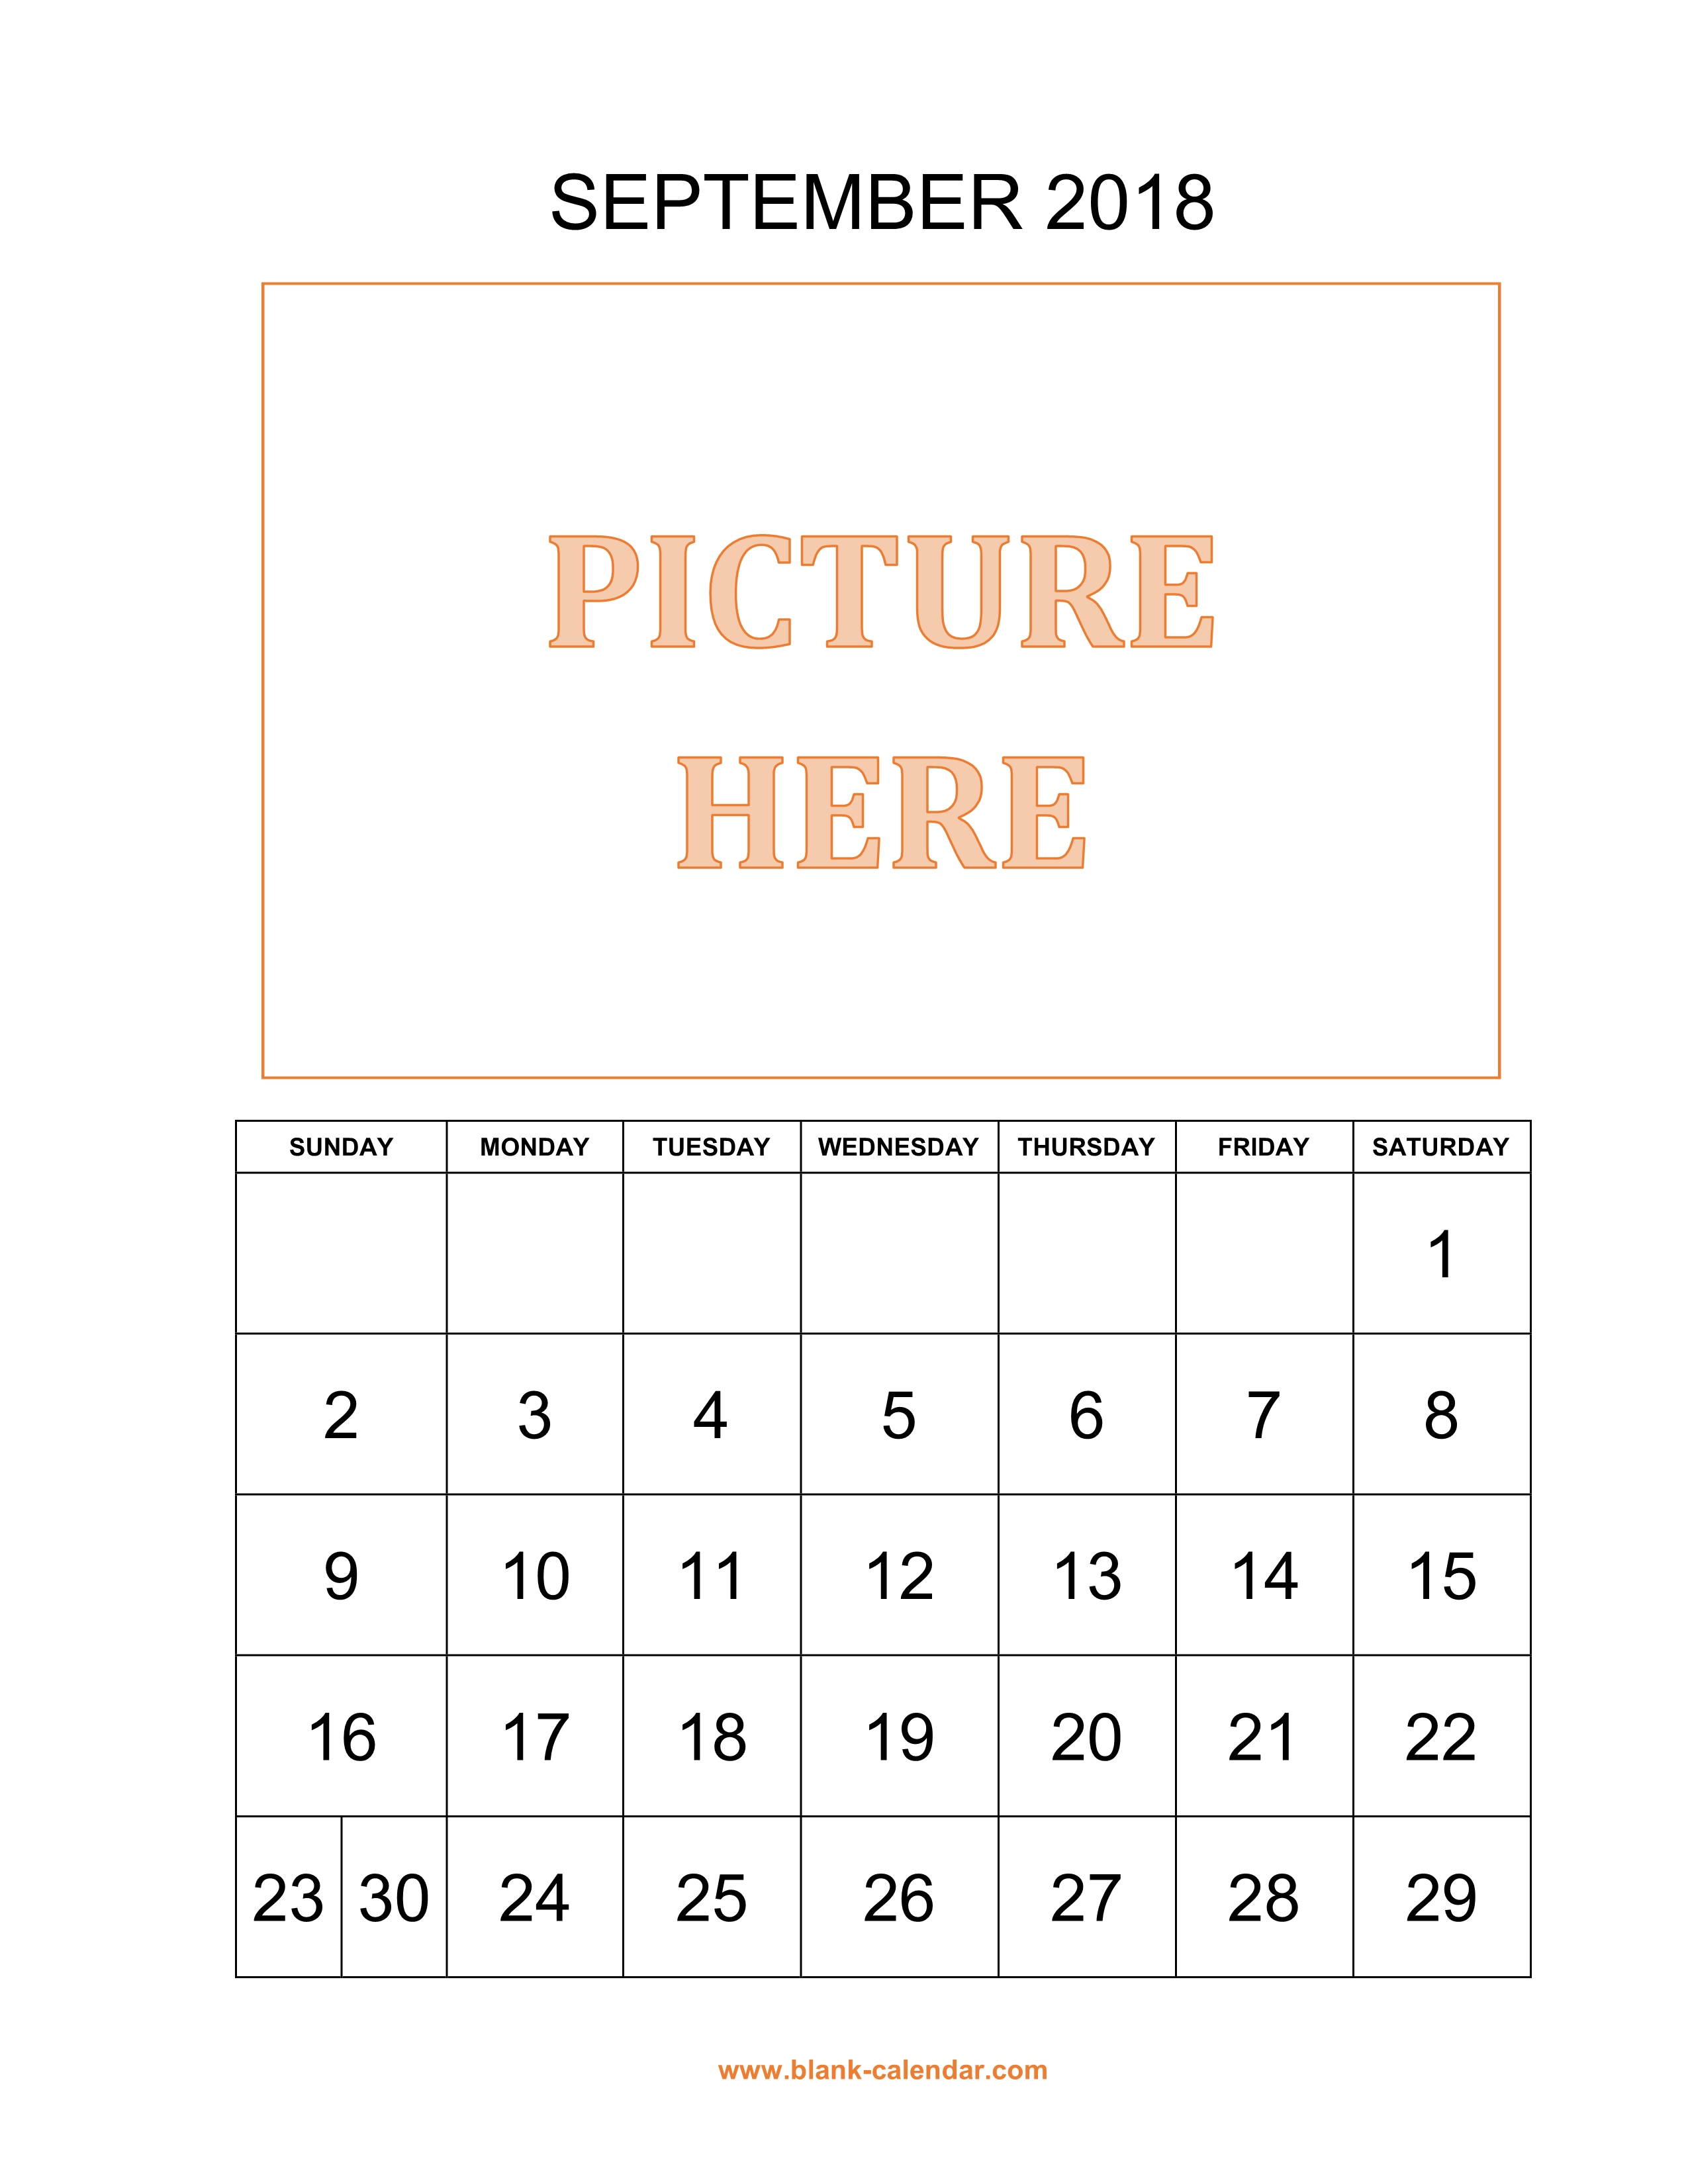 free-download-printable-september-2018-calendar-pictures-can-be-placed